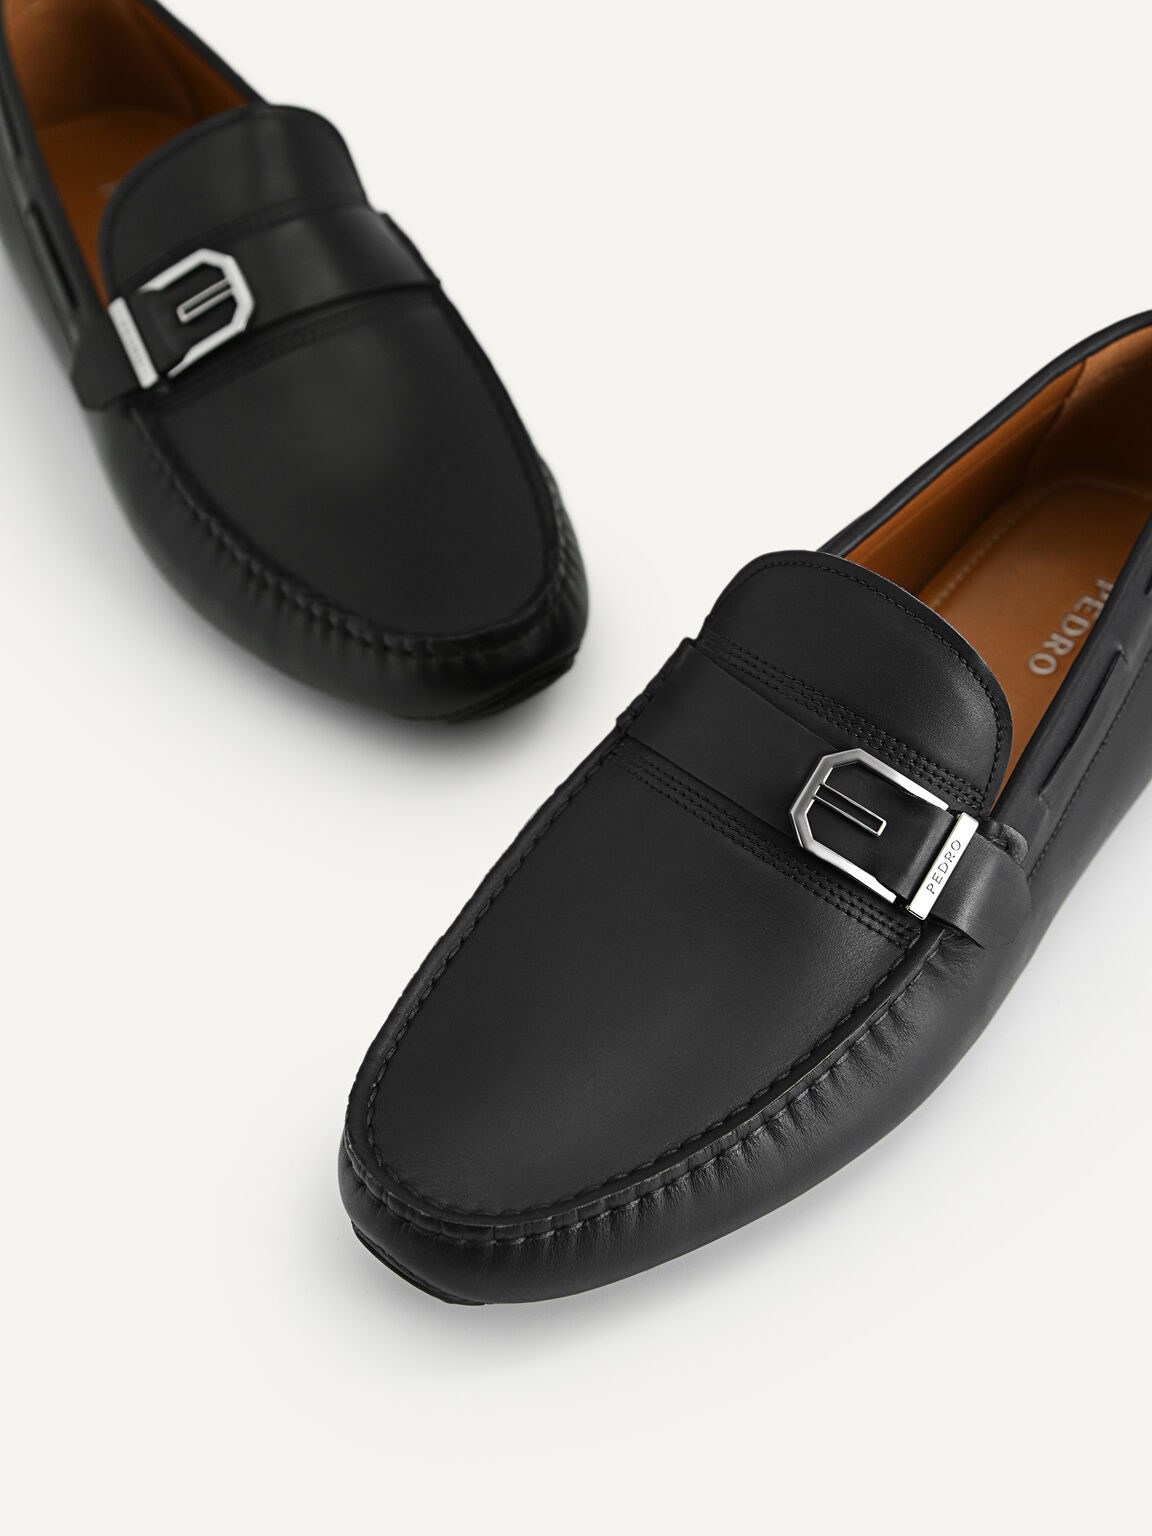 Leather Moccasins with Buckle Detailing, Black